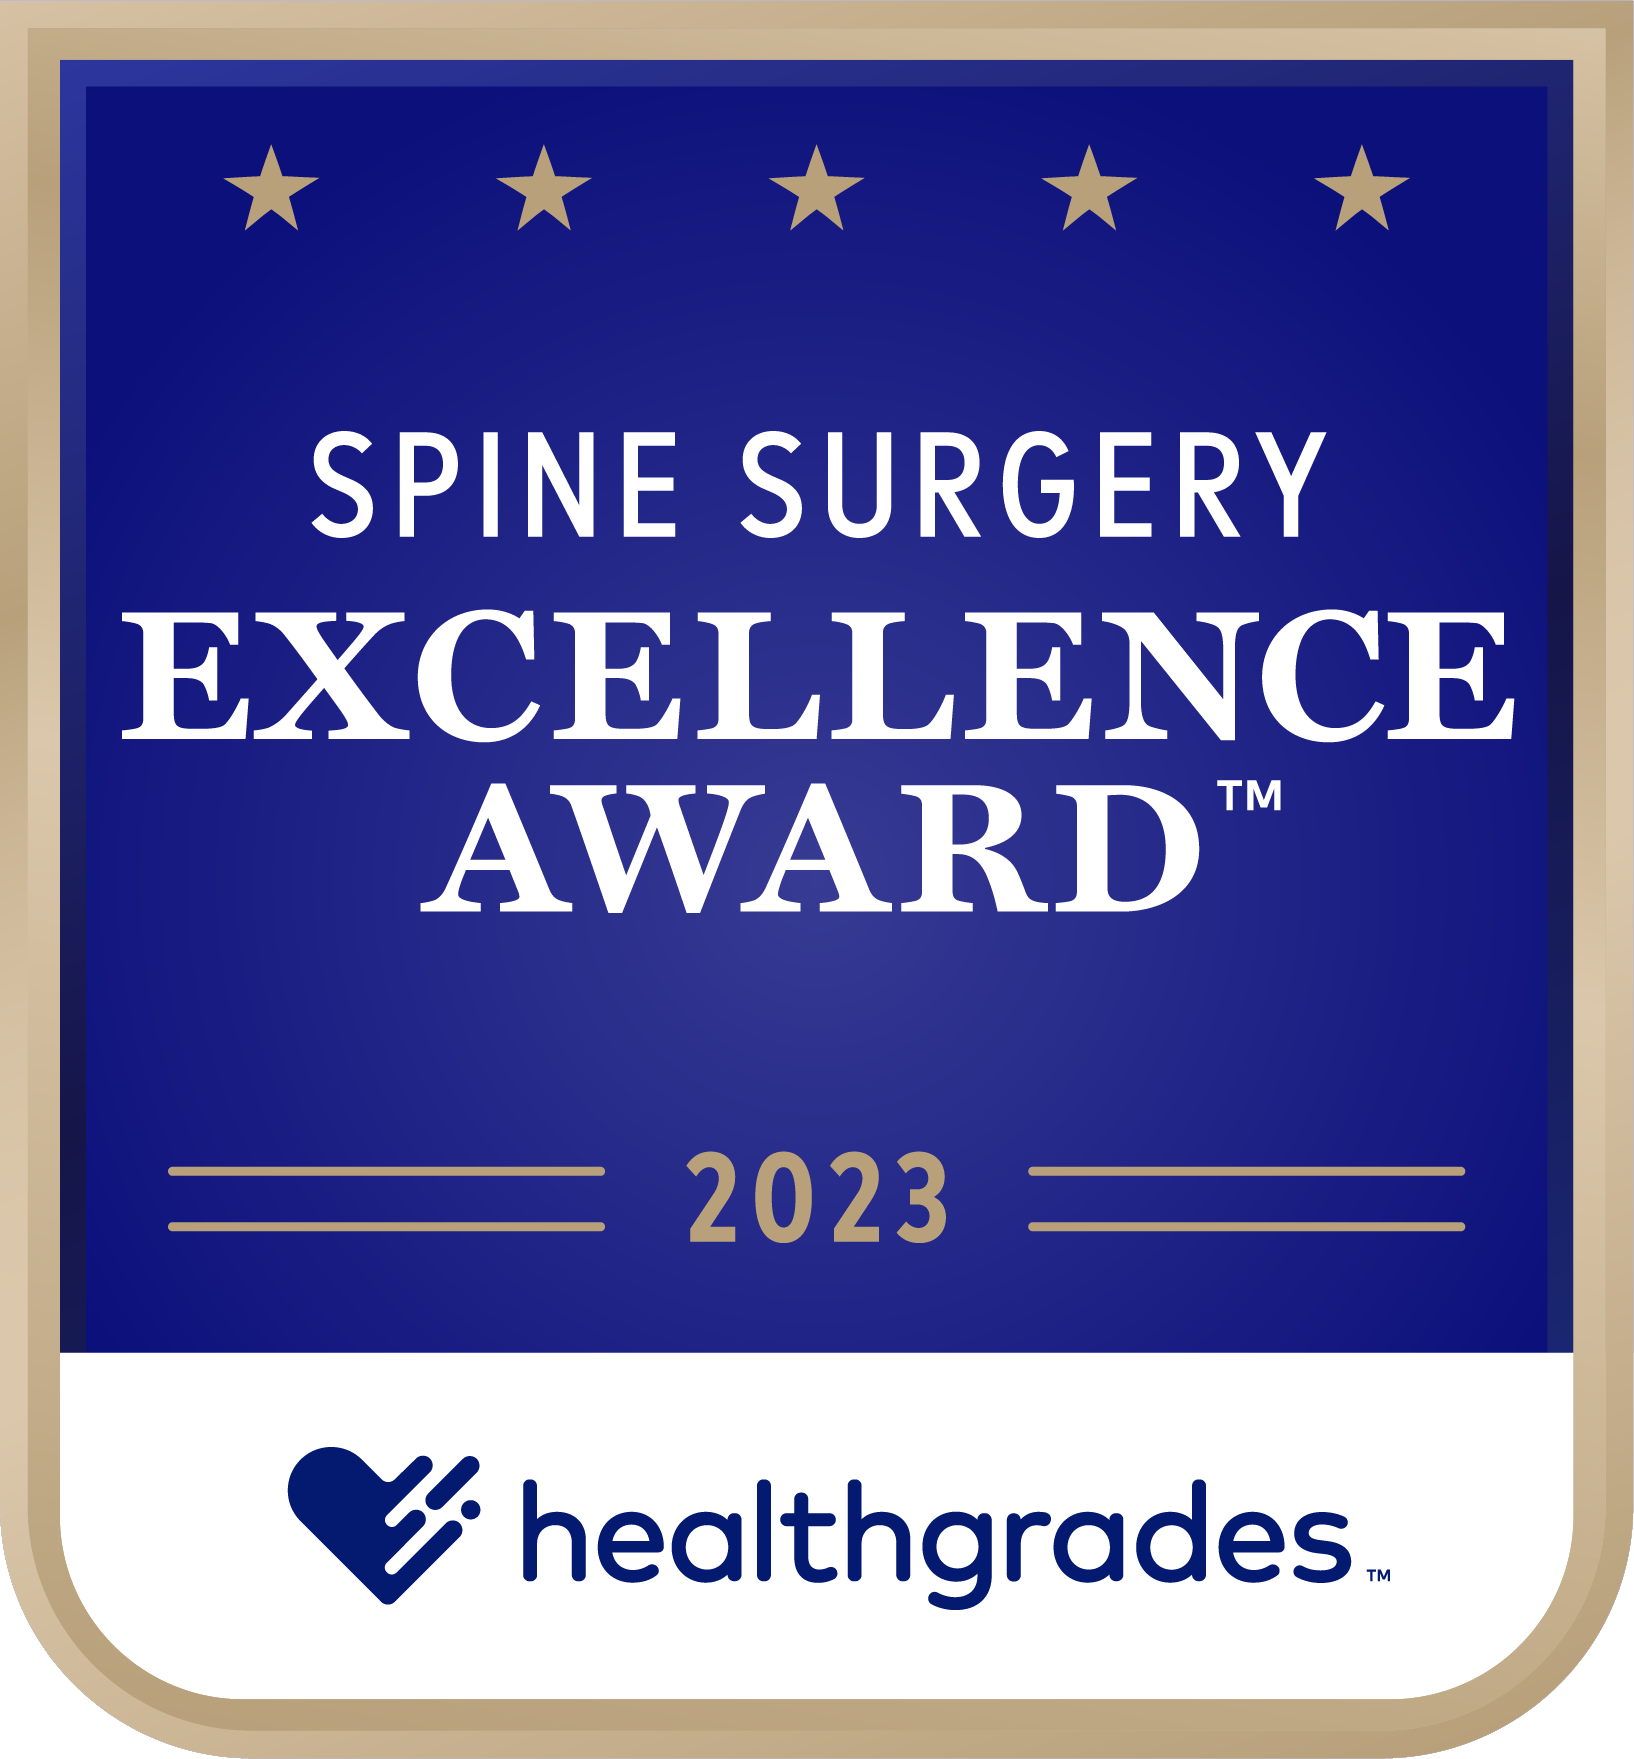 Spine Surgery Excellence Award